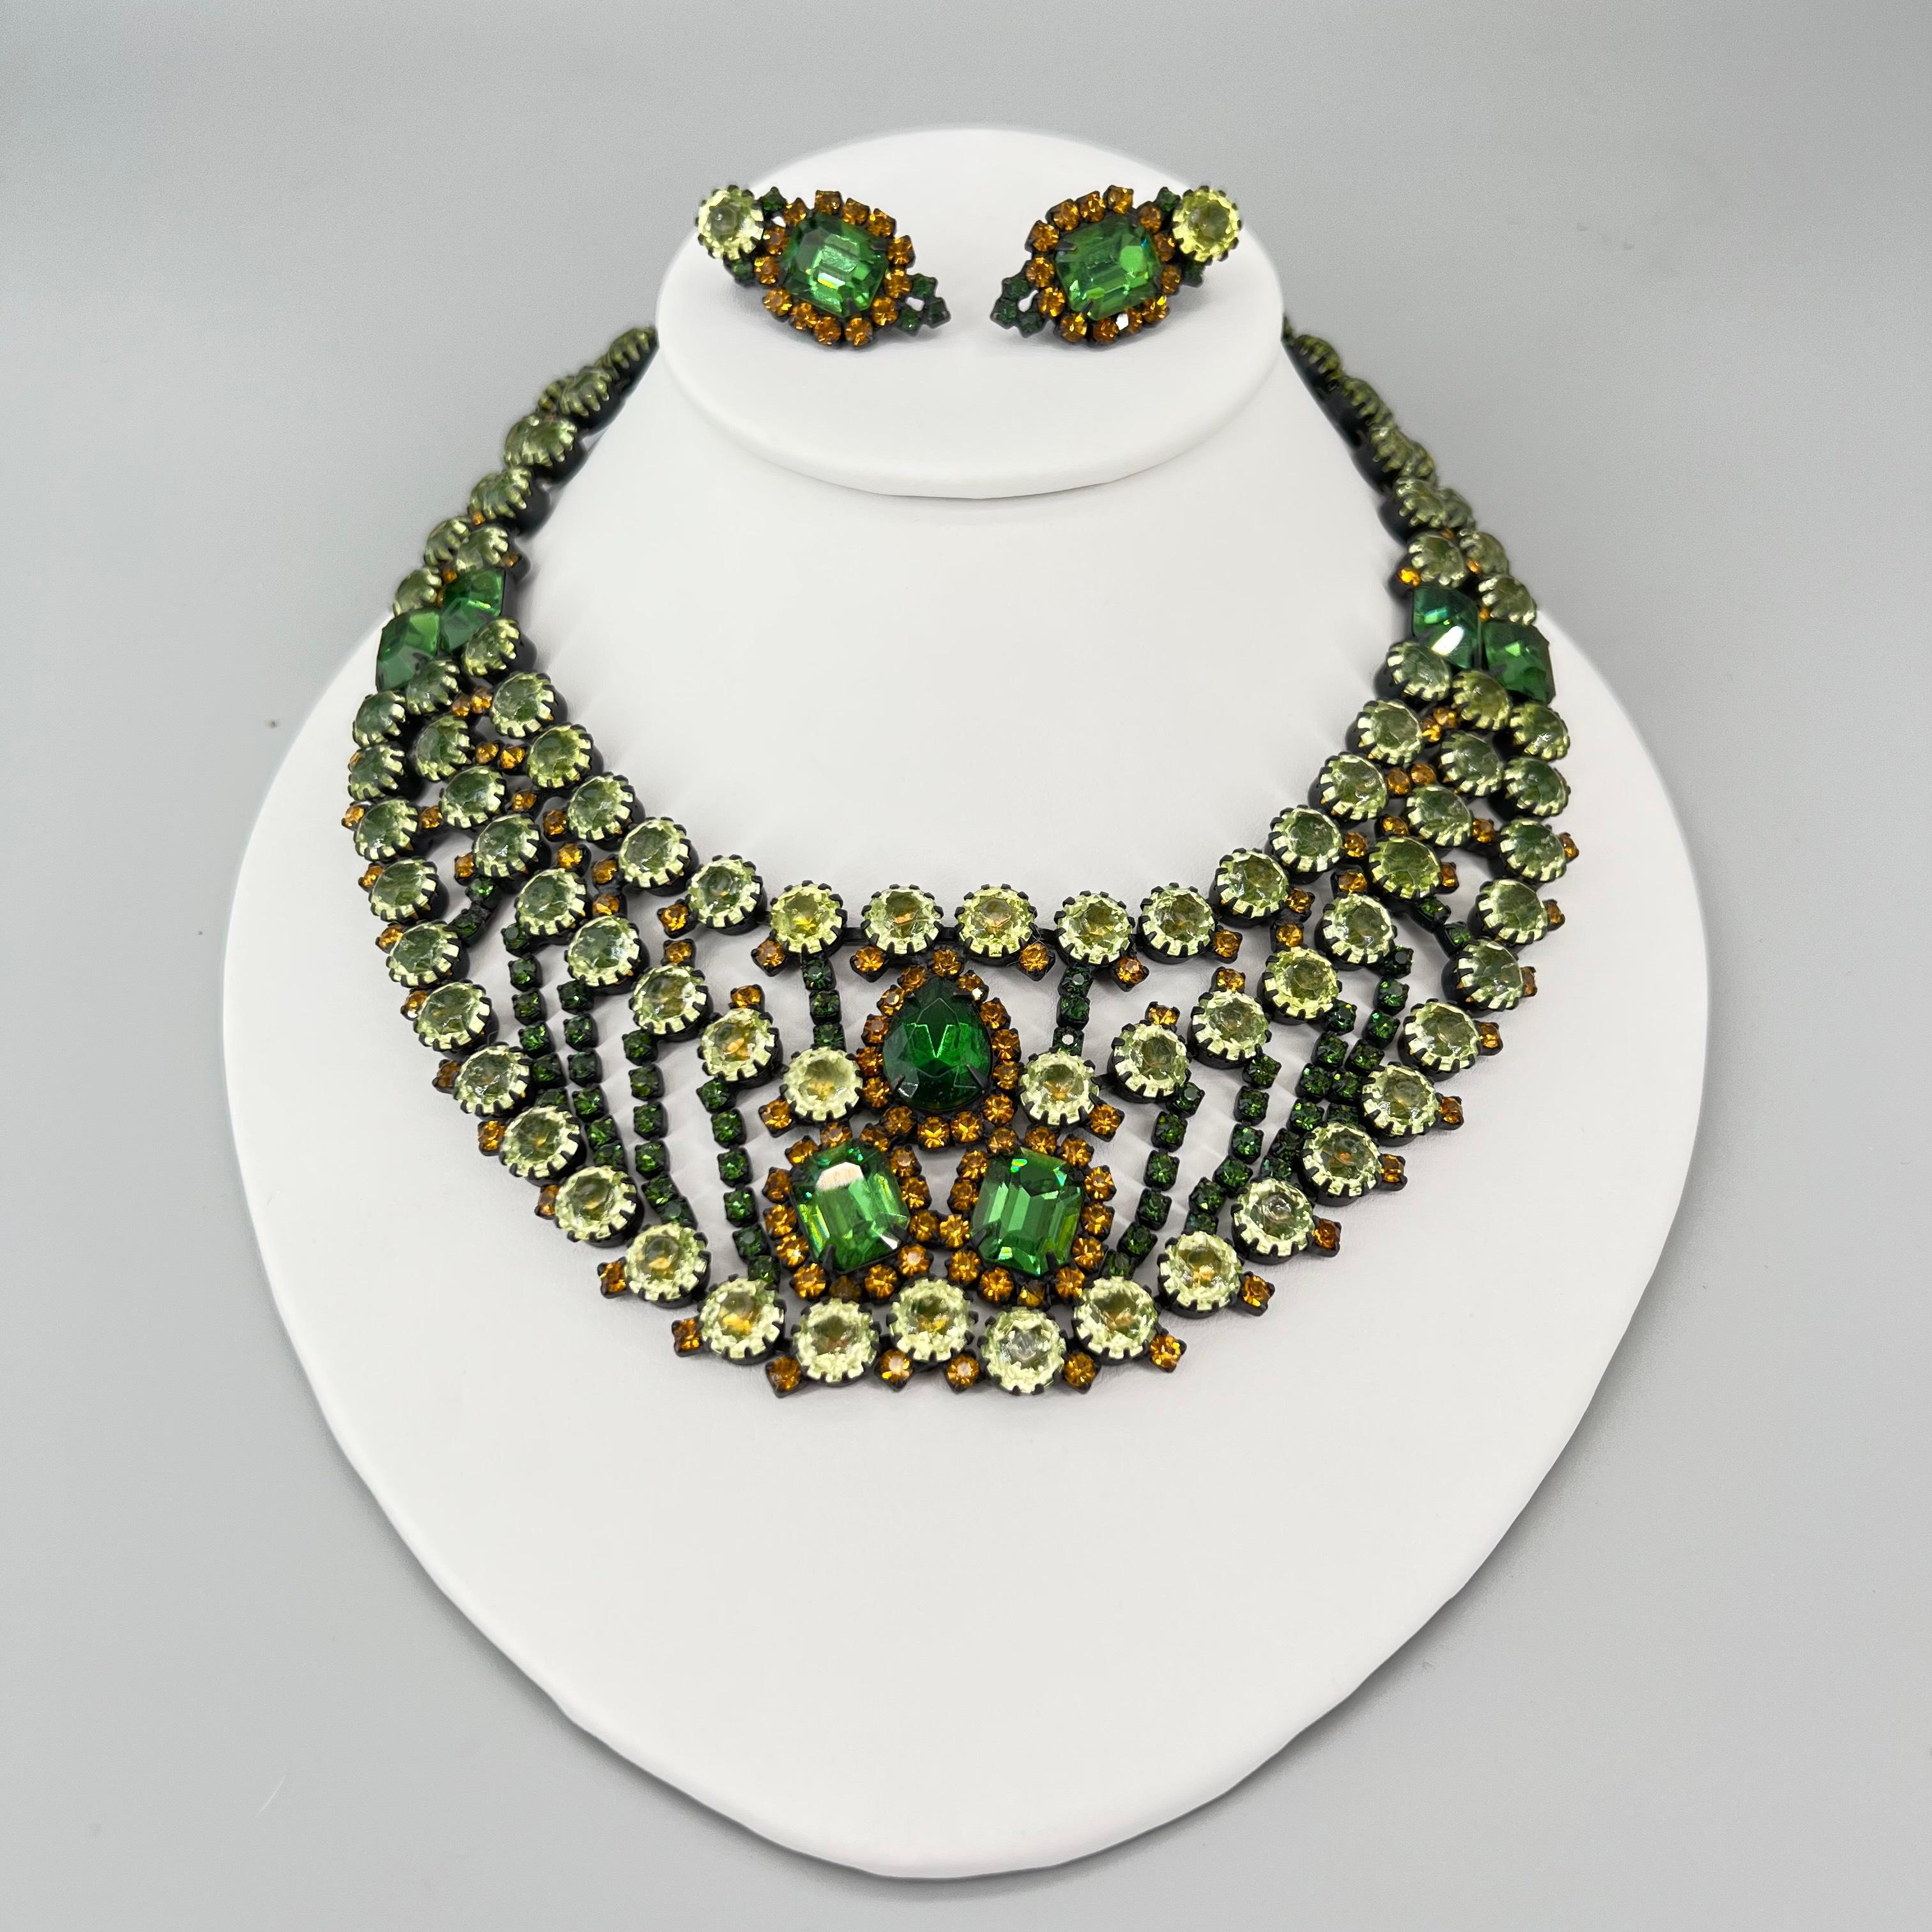 Black Japanned Prog setting filled with Emerald, Peridot, and Citrine Rhinestones in Round, Emerald and Teardrop Cut. The Citrine Rhinestones are Vaseline Glass and Glow Brilliantly under UV light. Oversized stones and incredible detail make this